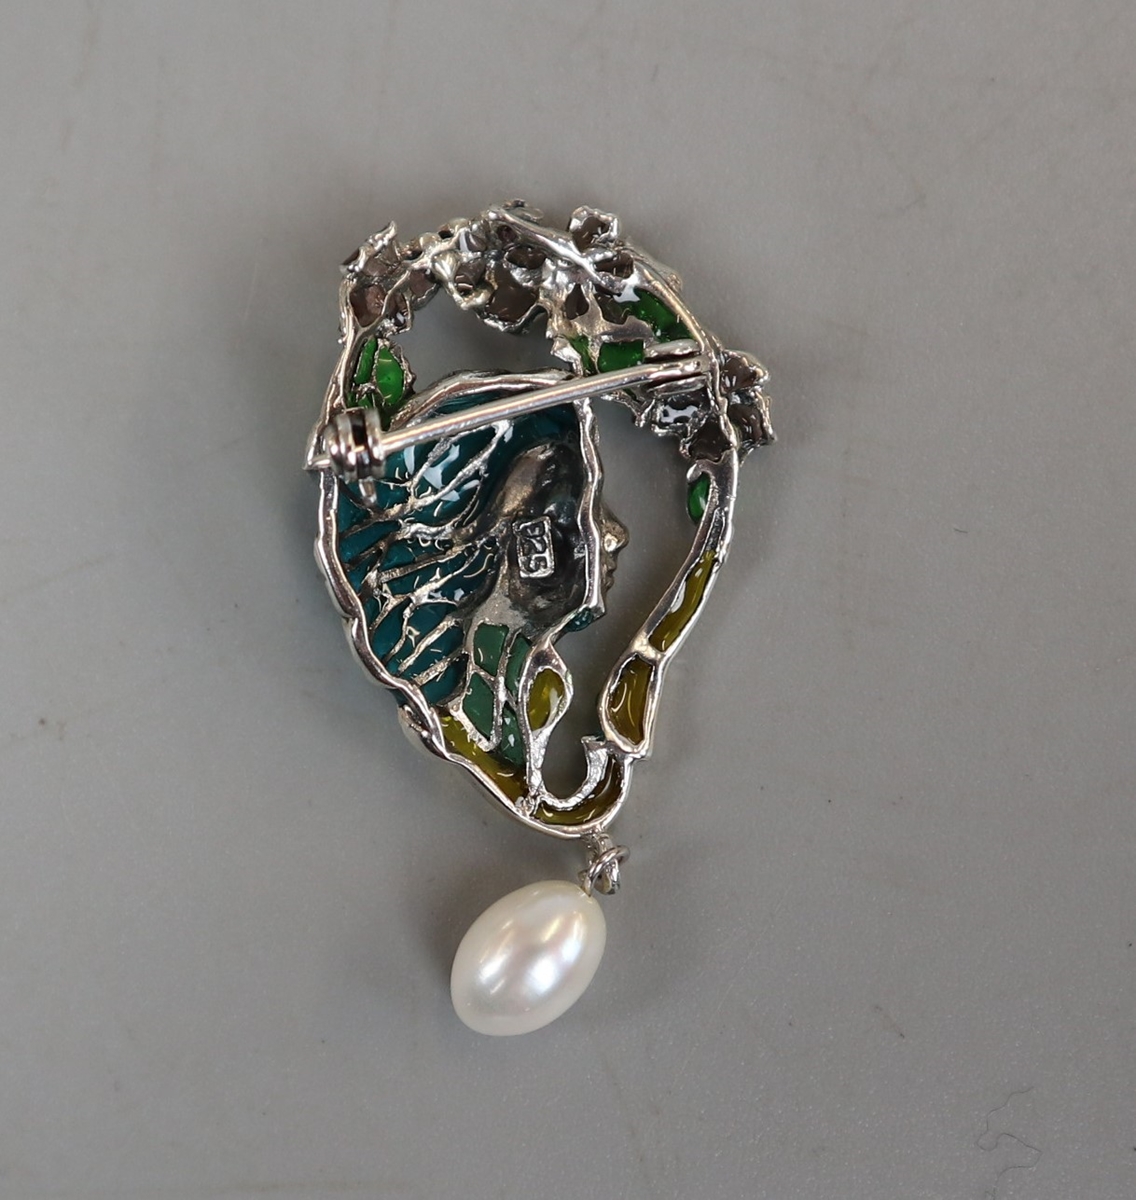 Silver and enamel Art Nouveau style brooch - Image 2 of 2